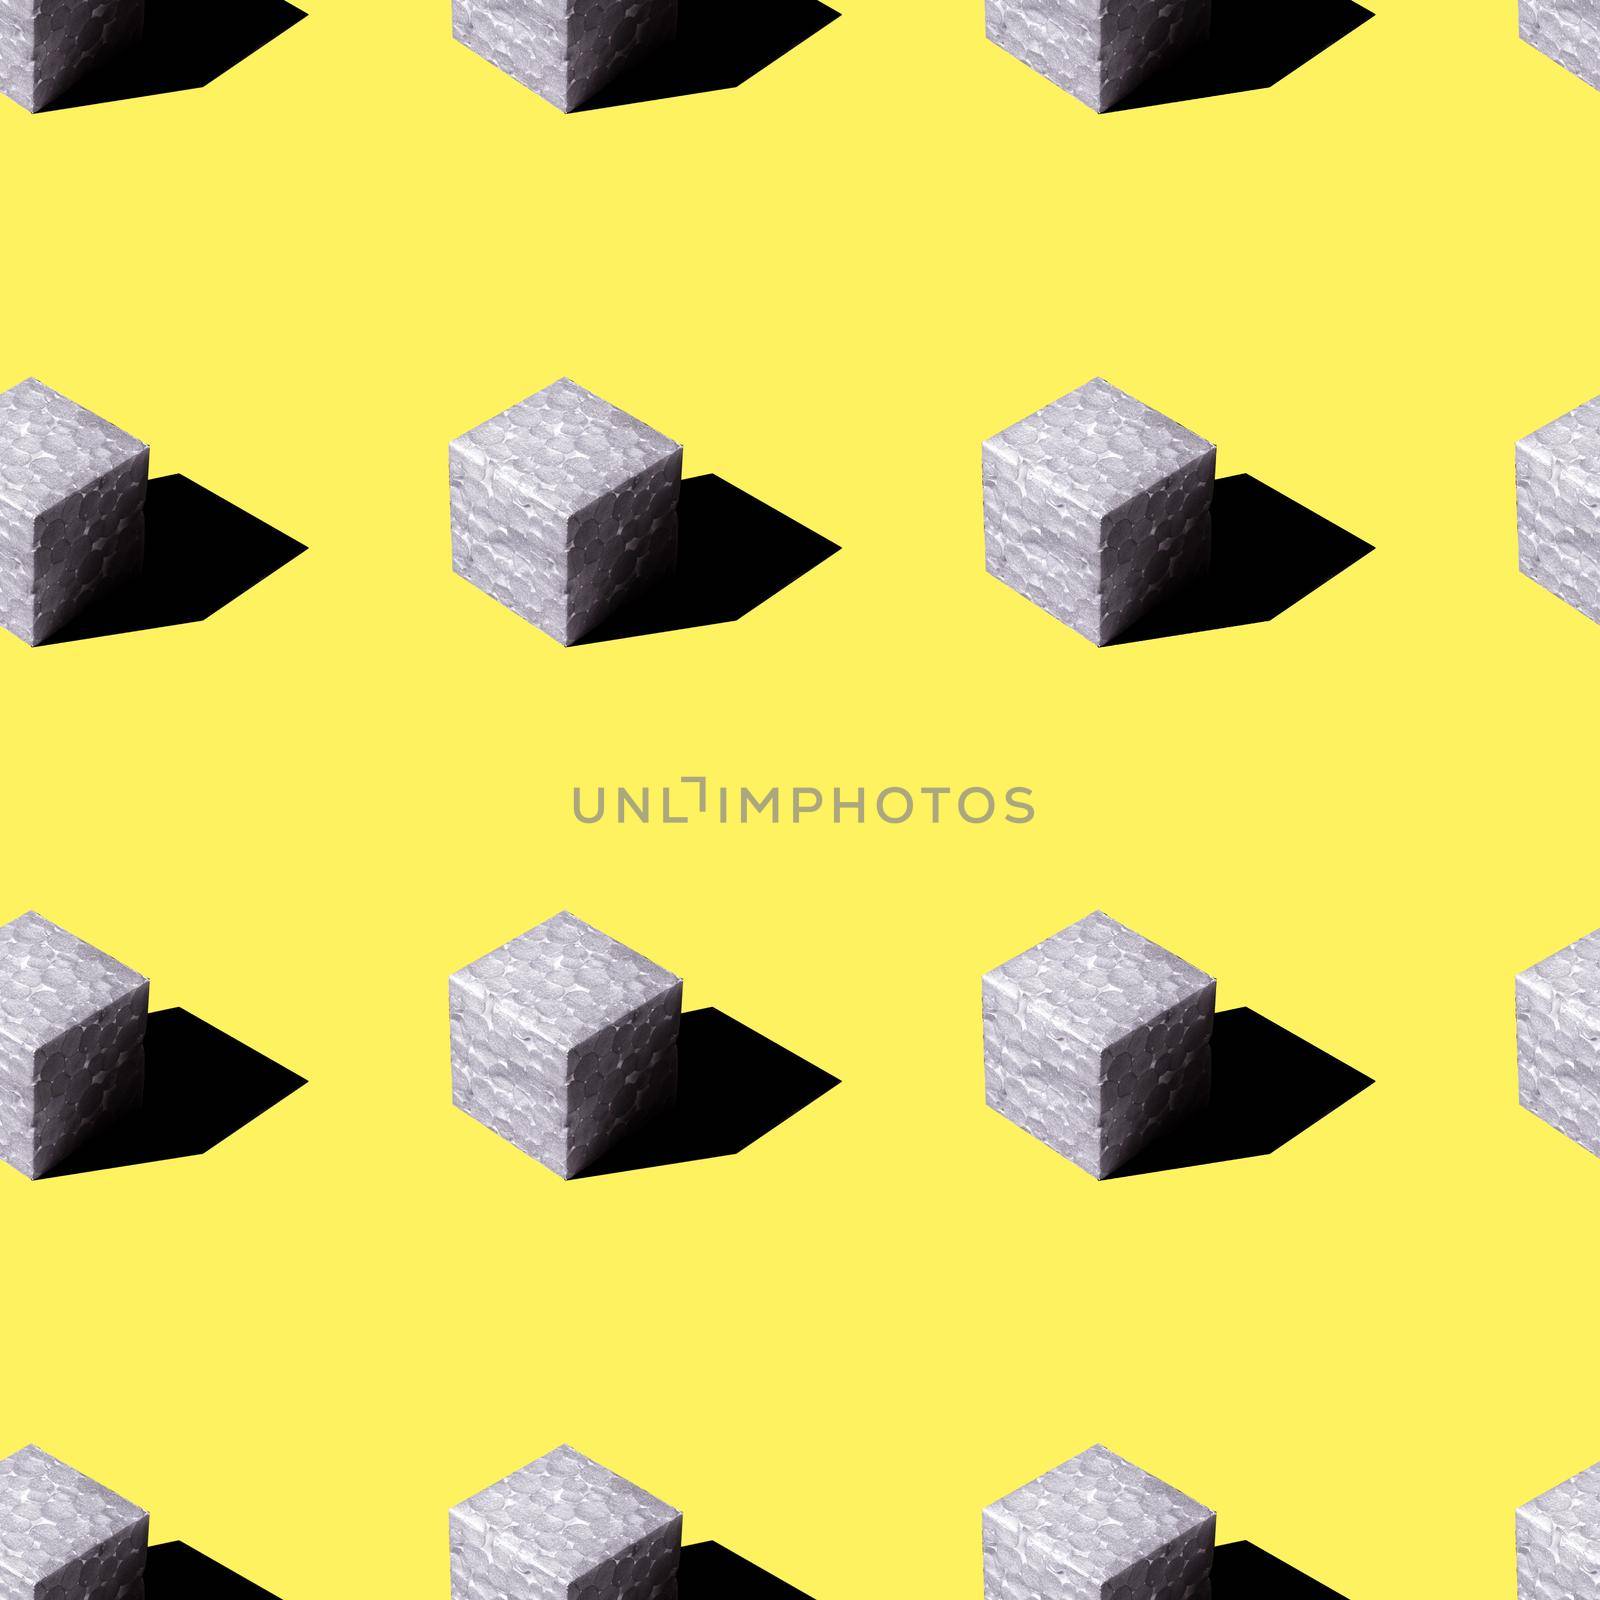 Gray squares with a black shadow on a yellow background. by bySergPo